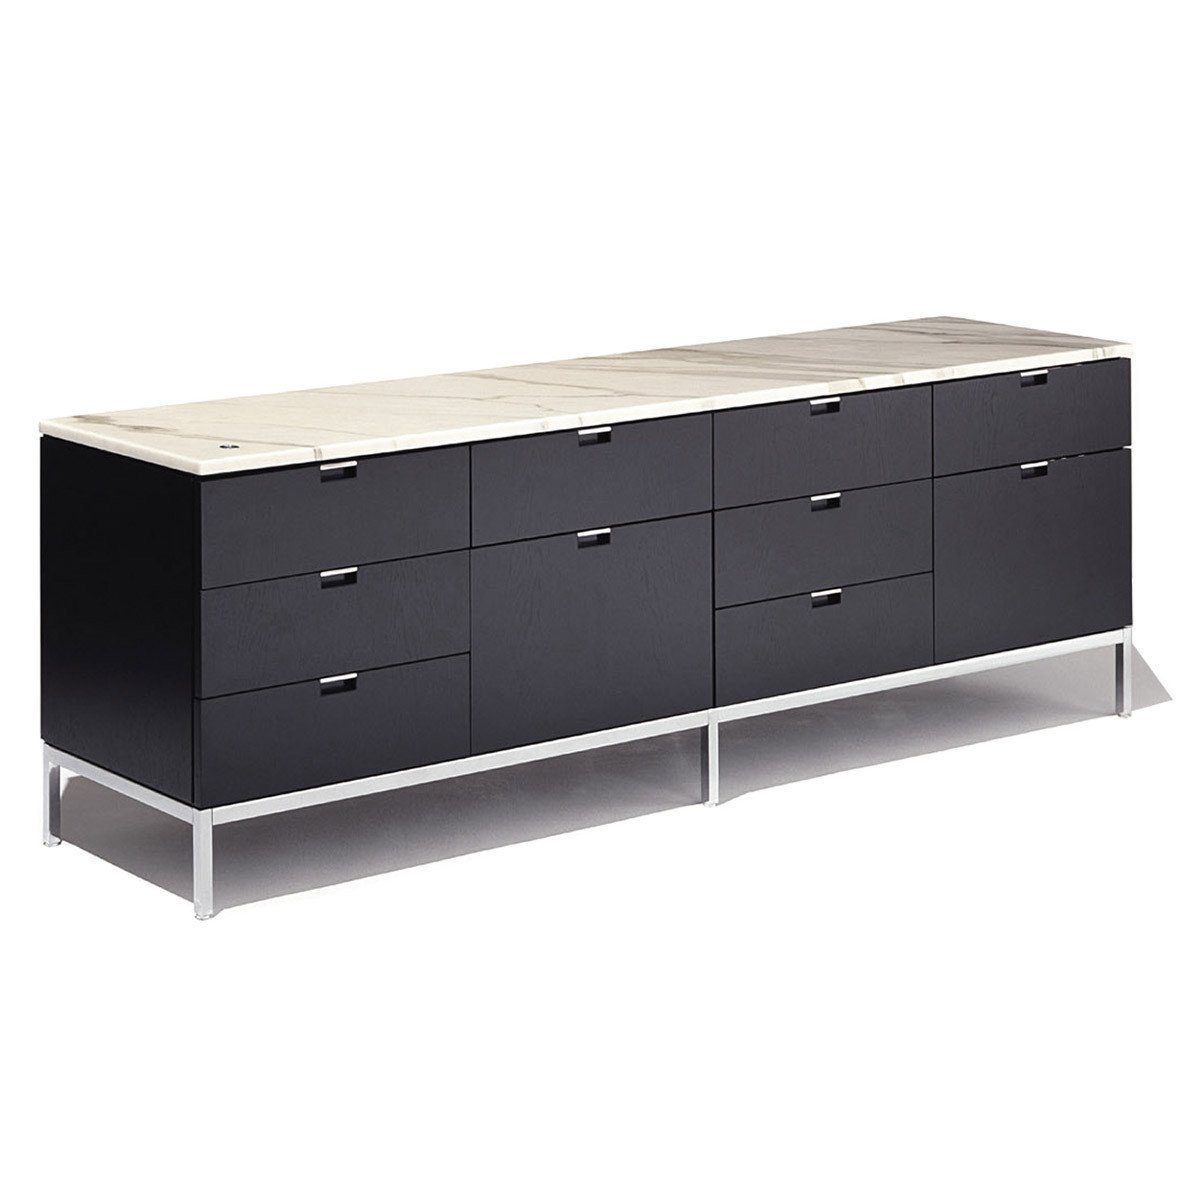 Check out the Knoll Home Office Sale